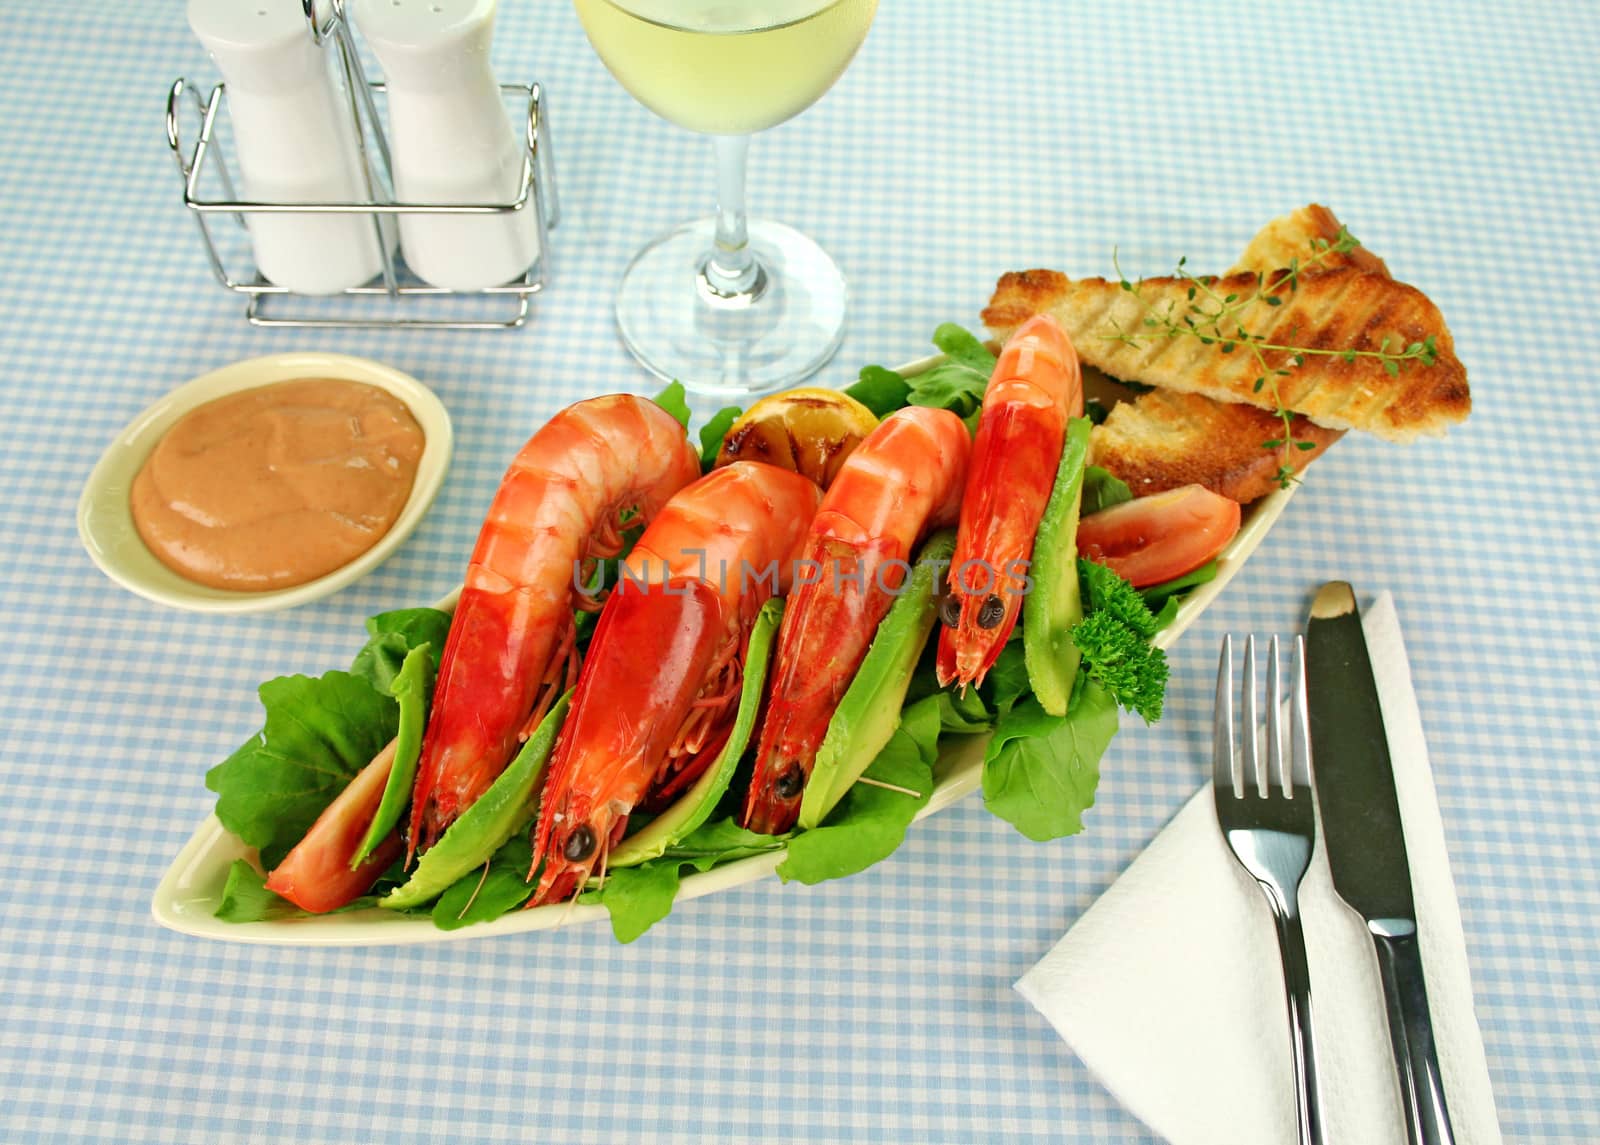 Freshly prepared shrimps with rocket salad and toasted bread with Thousand Island Dressing.